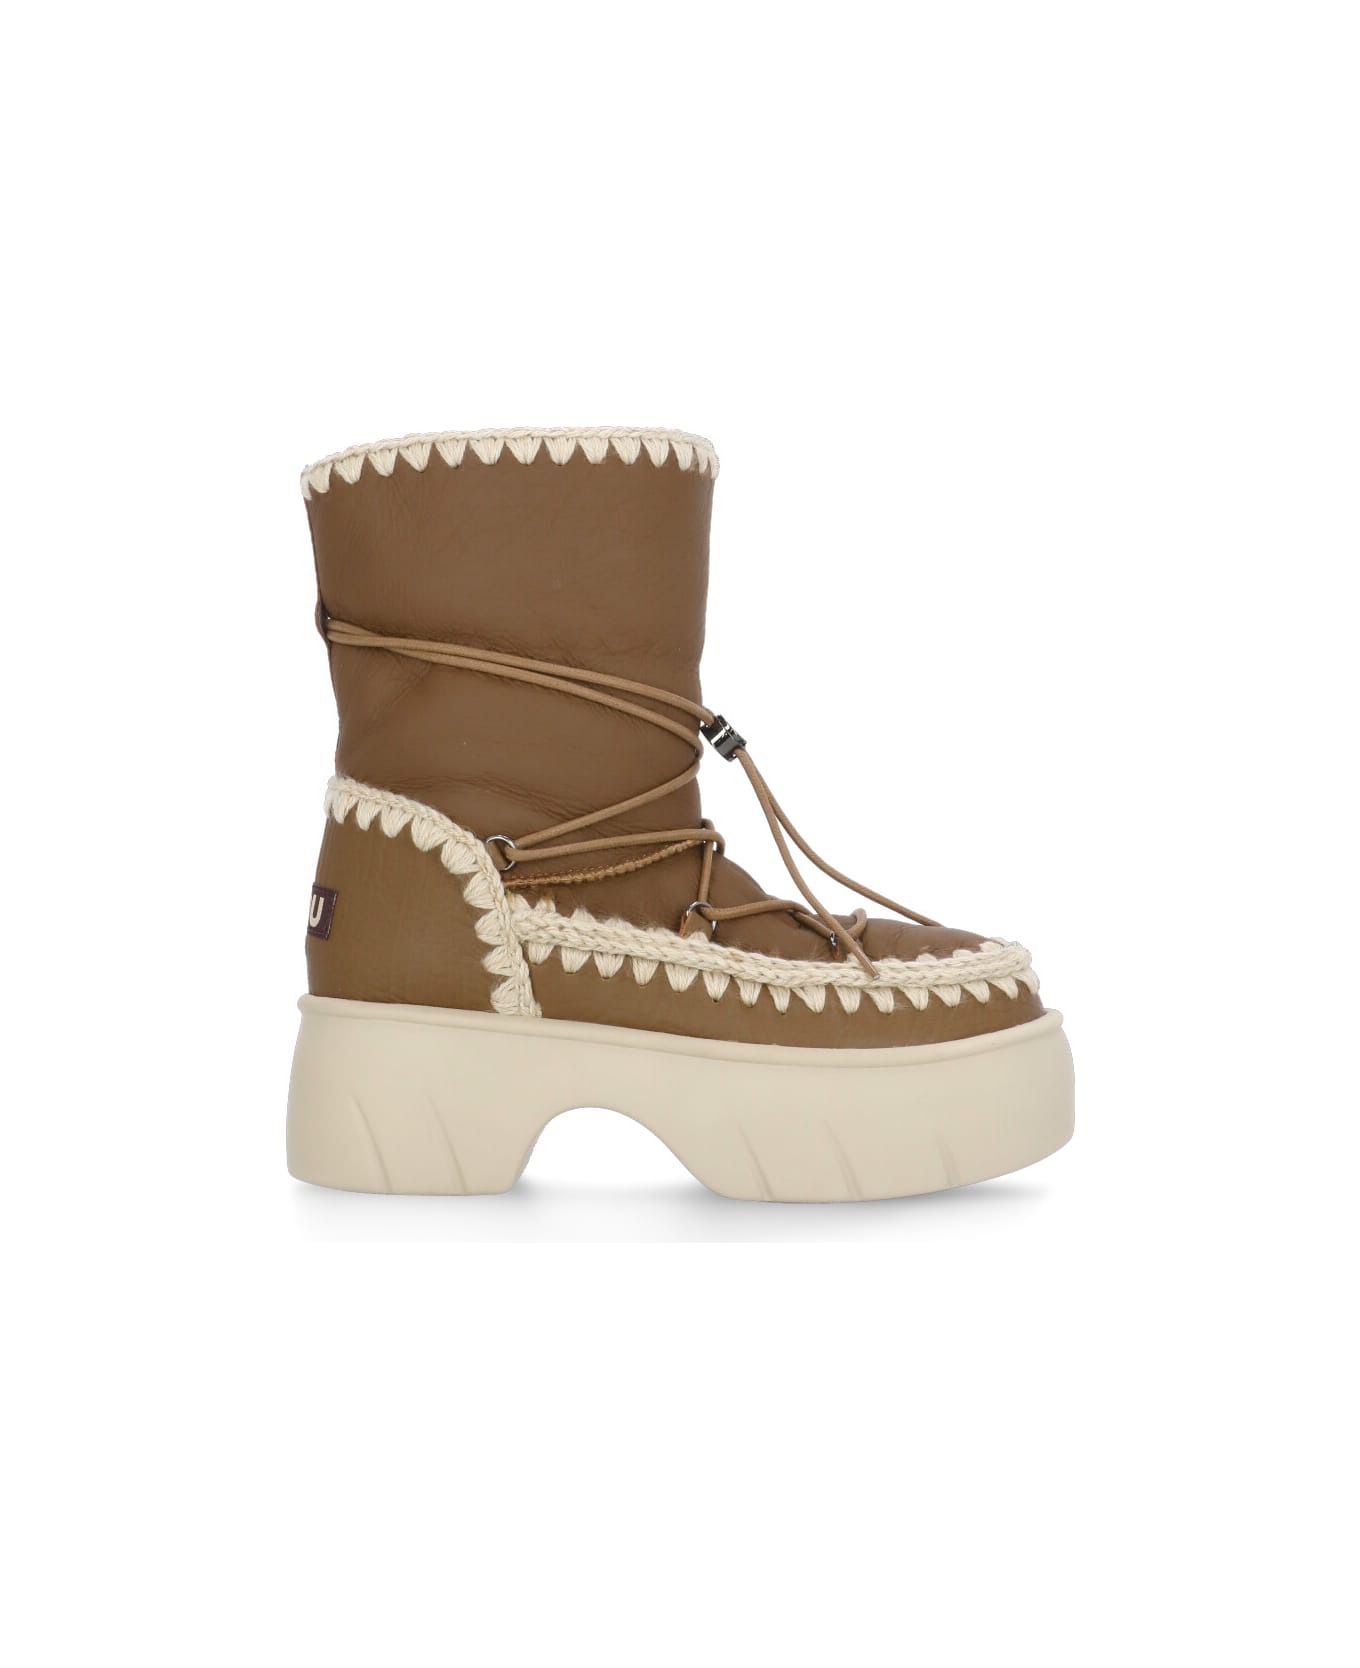 Mou Eskimo Twist Short Ankle Boots - Brown ブーツ